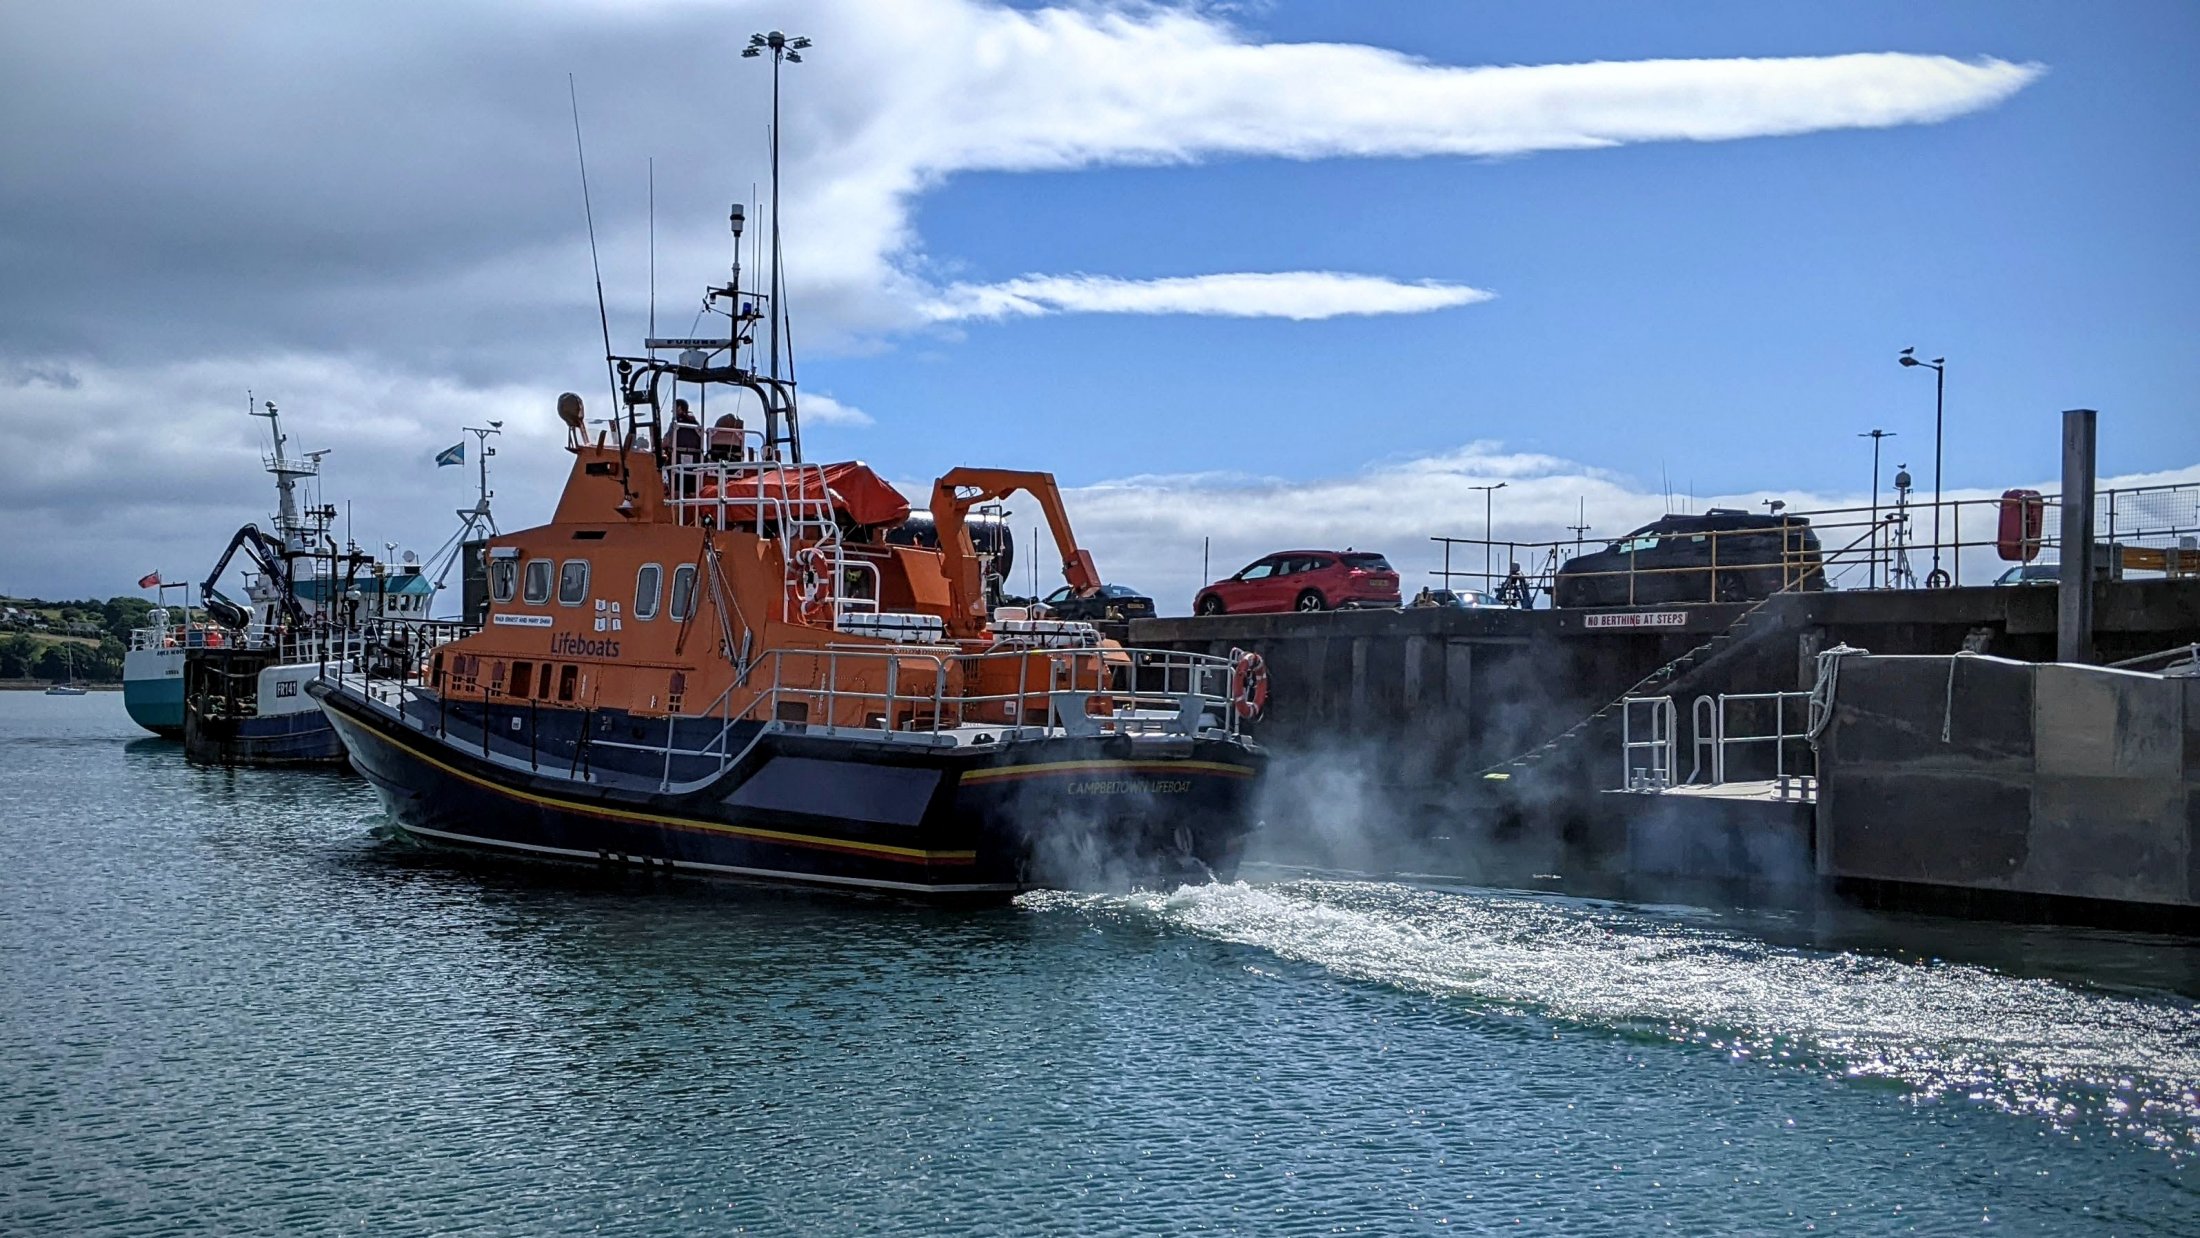 Campbeltown Lifeboat